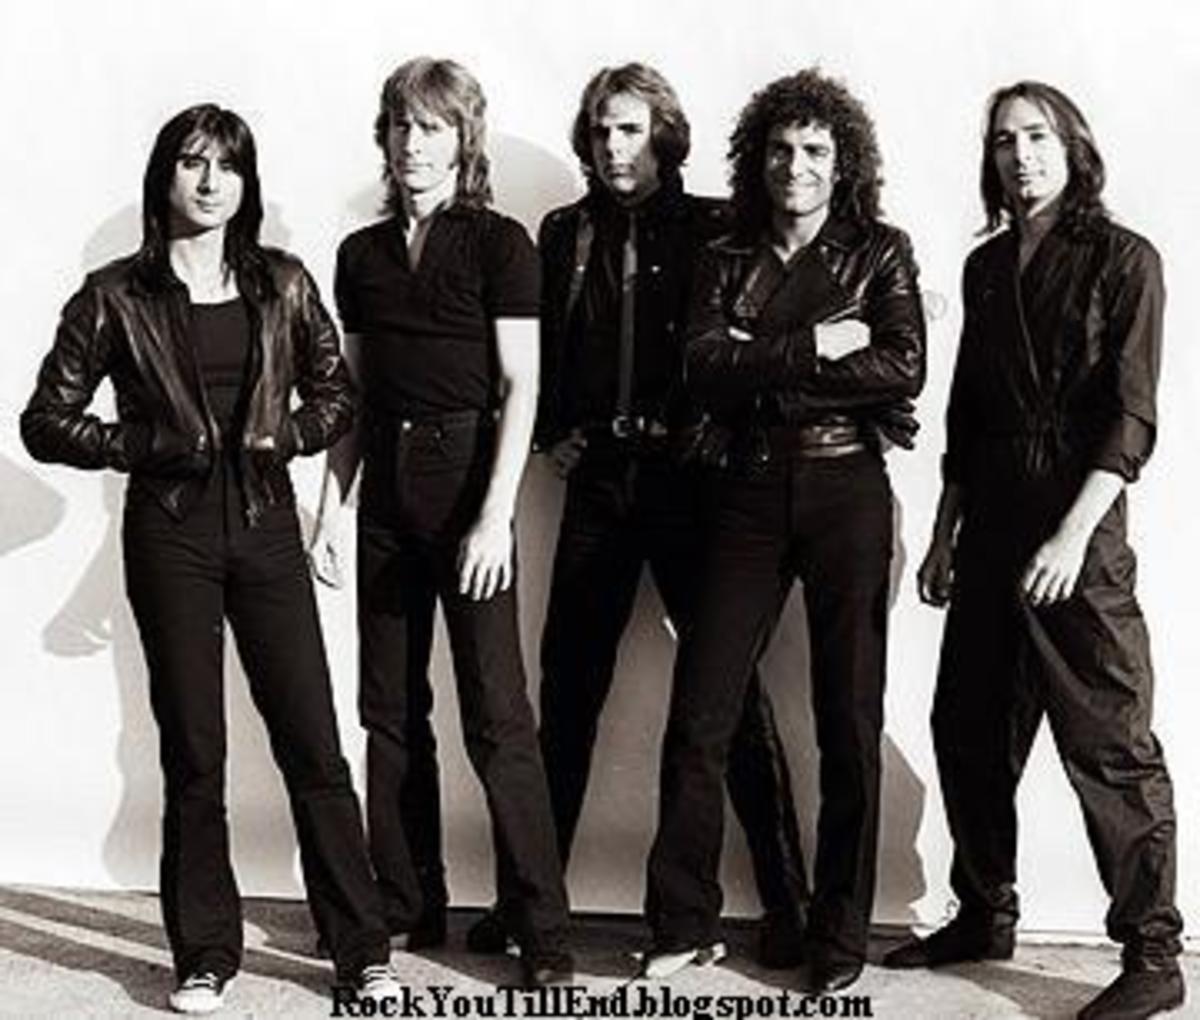 Journey (Steve Perry, Ross Valory, Jon Cain, Neal Schon and Steven Smith)